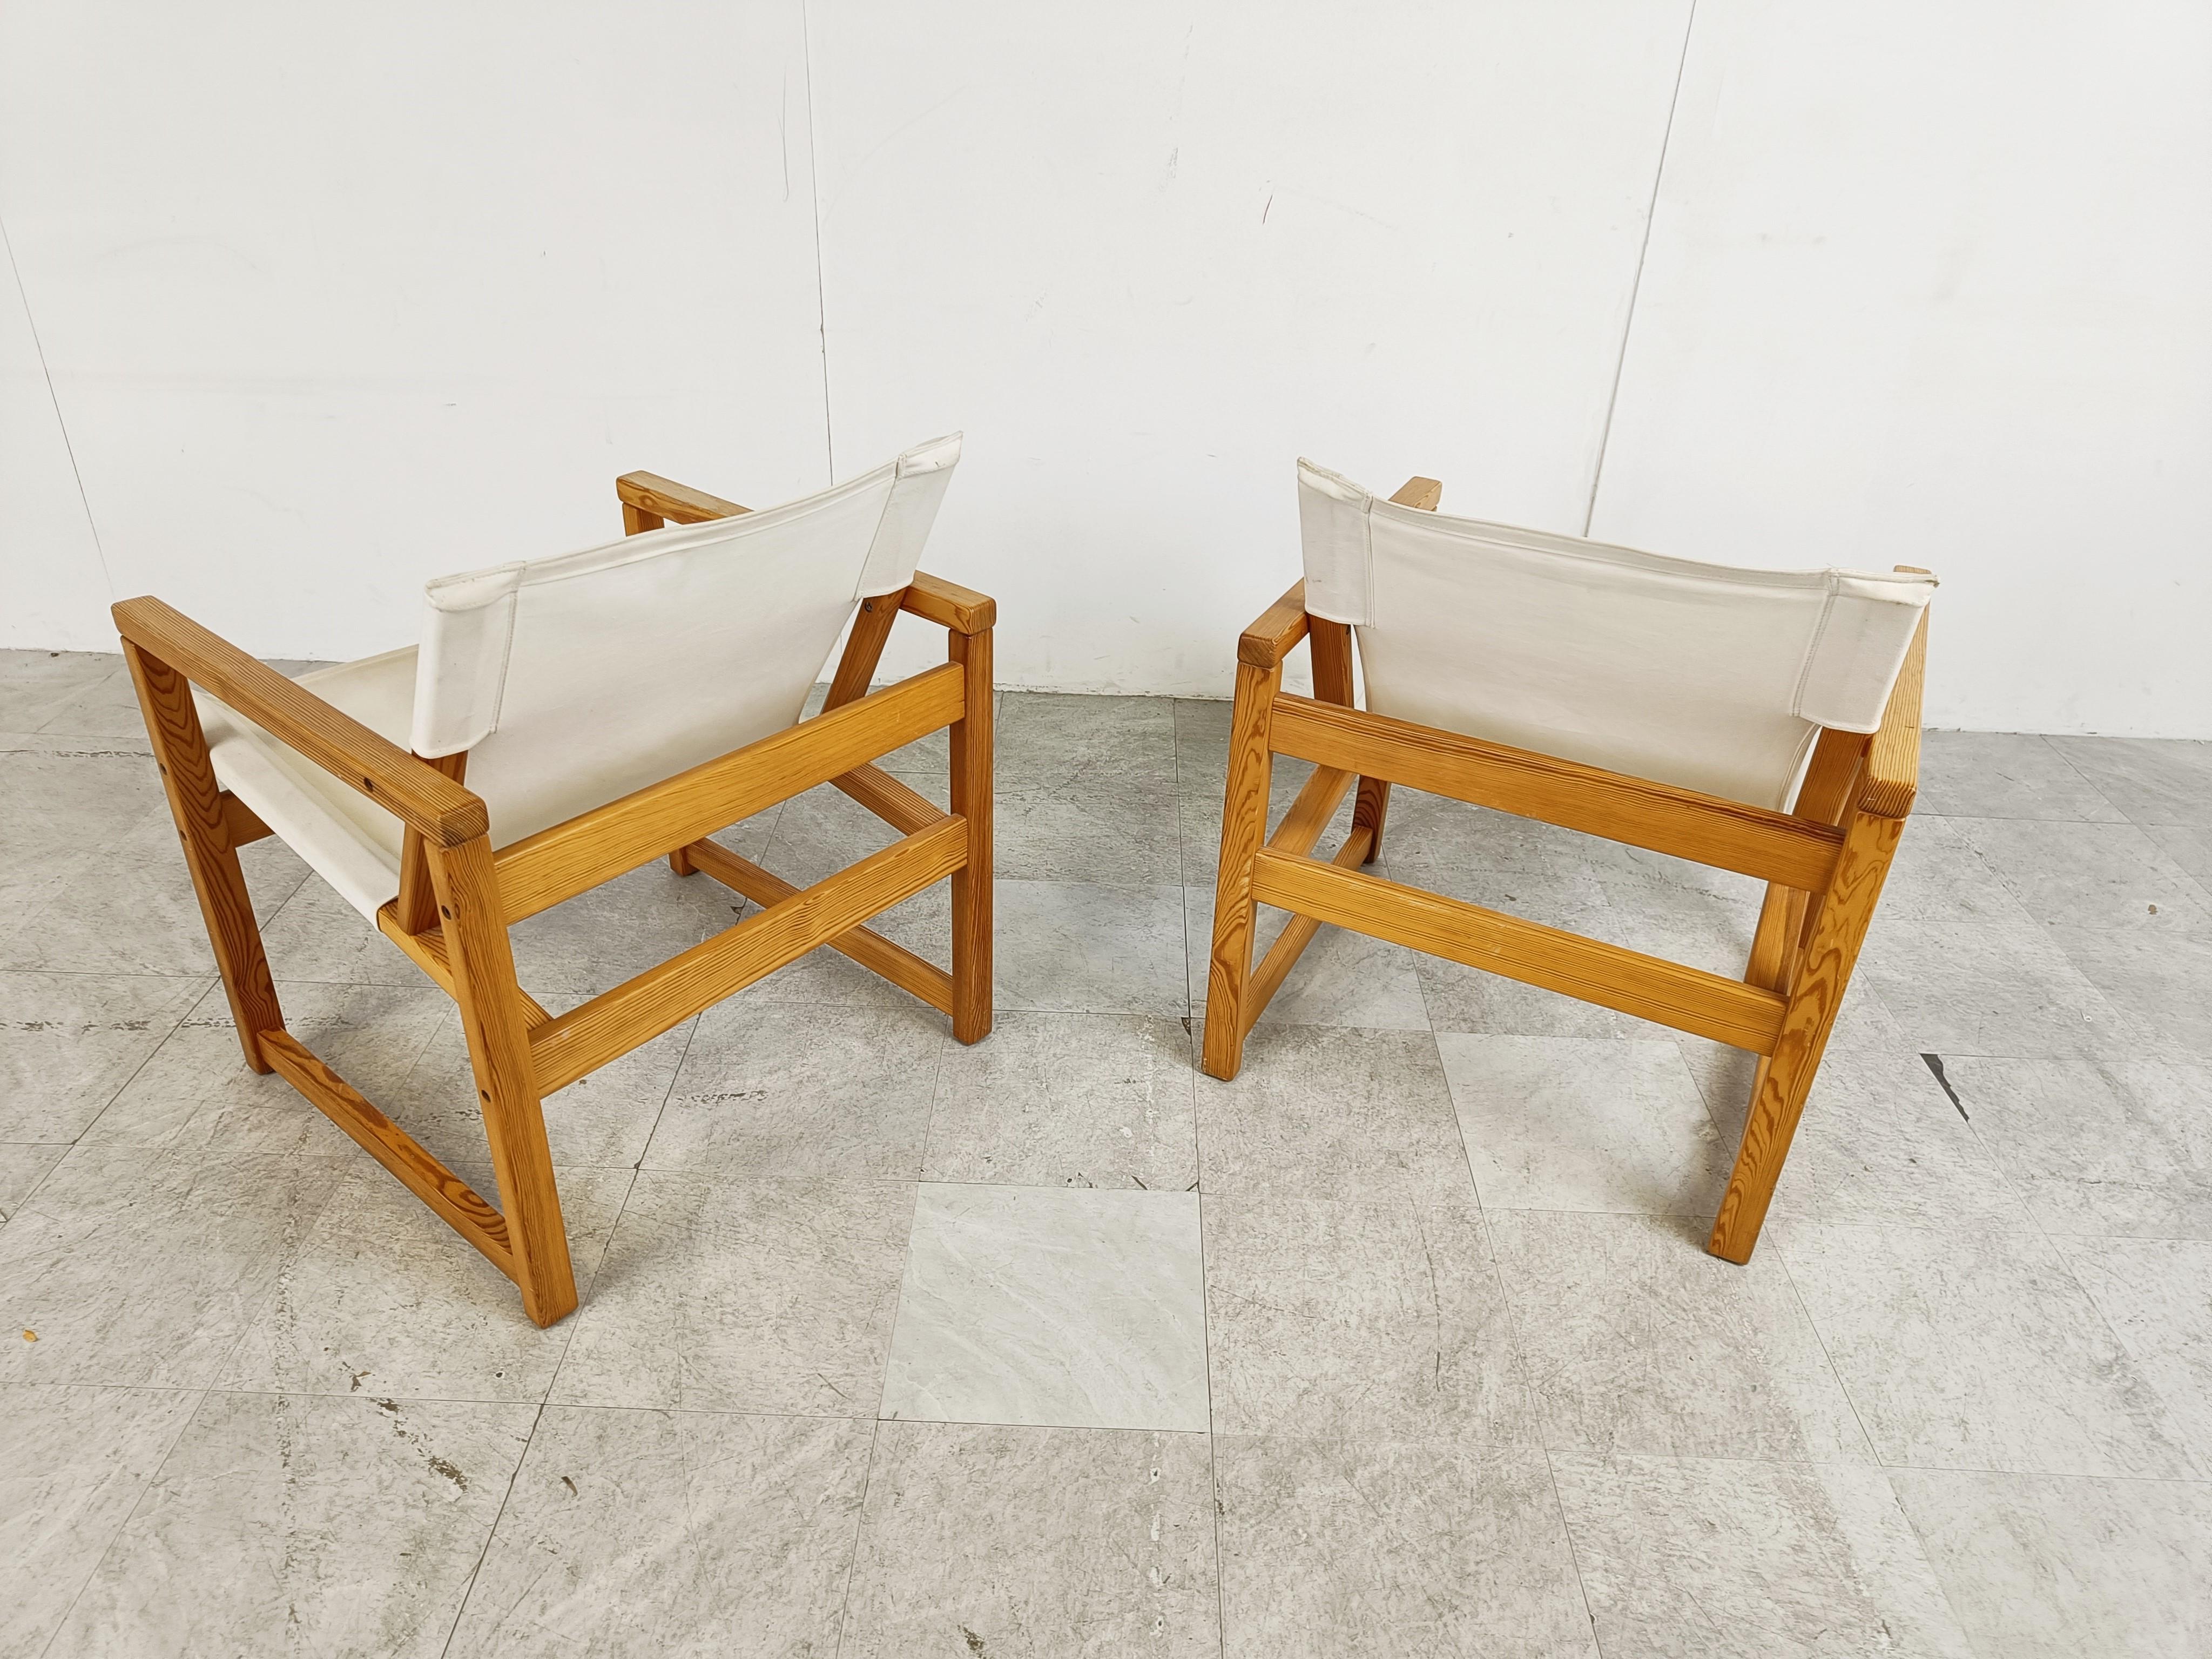 Fabric Vintage Safari Chairs by Tord Bjorlund for Ikea, 1980s